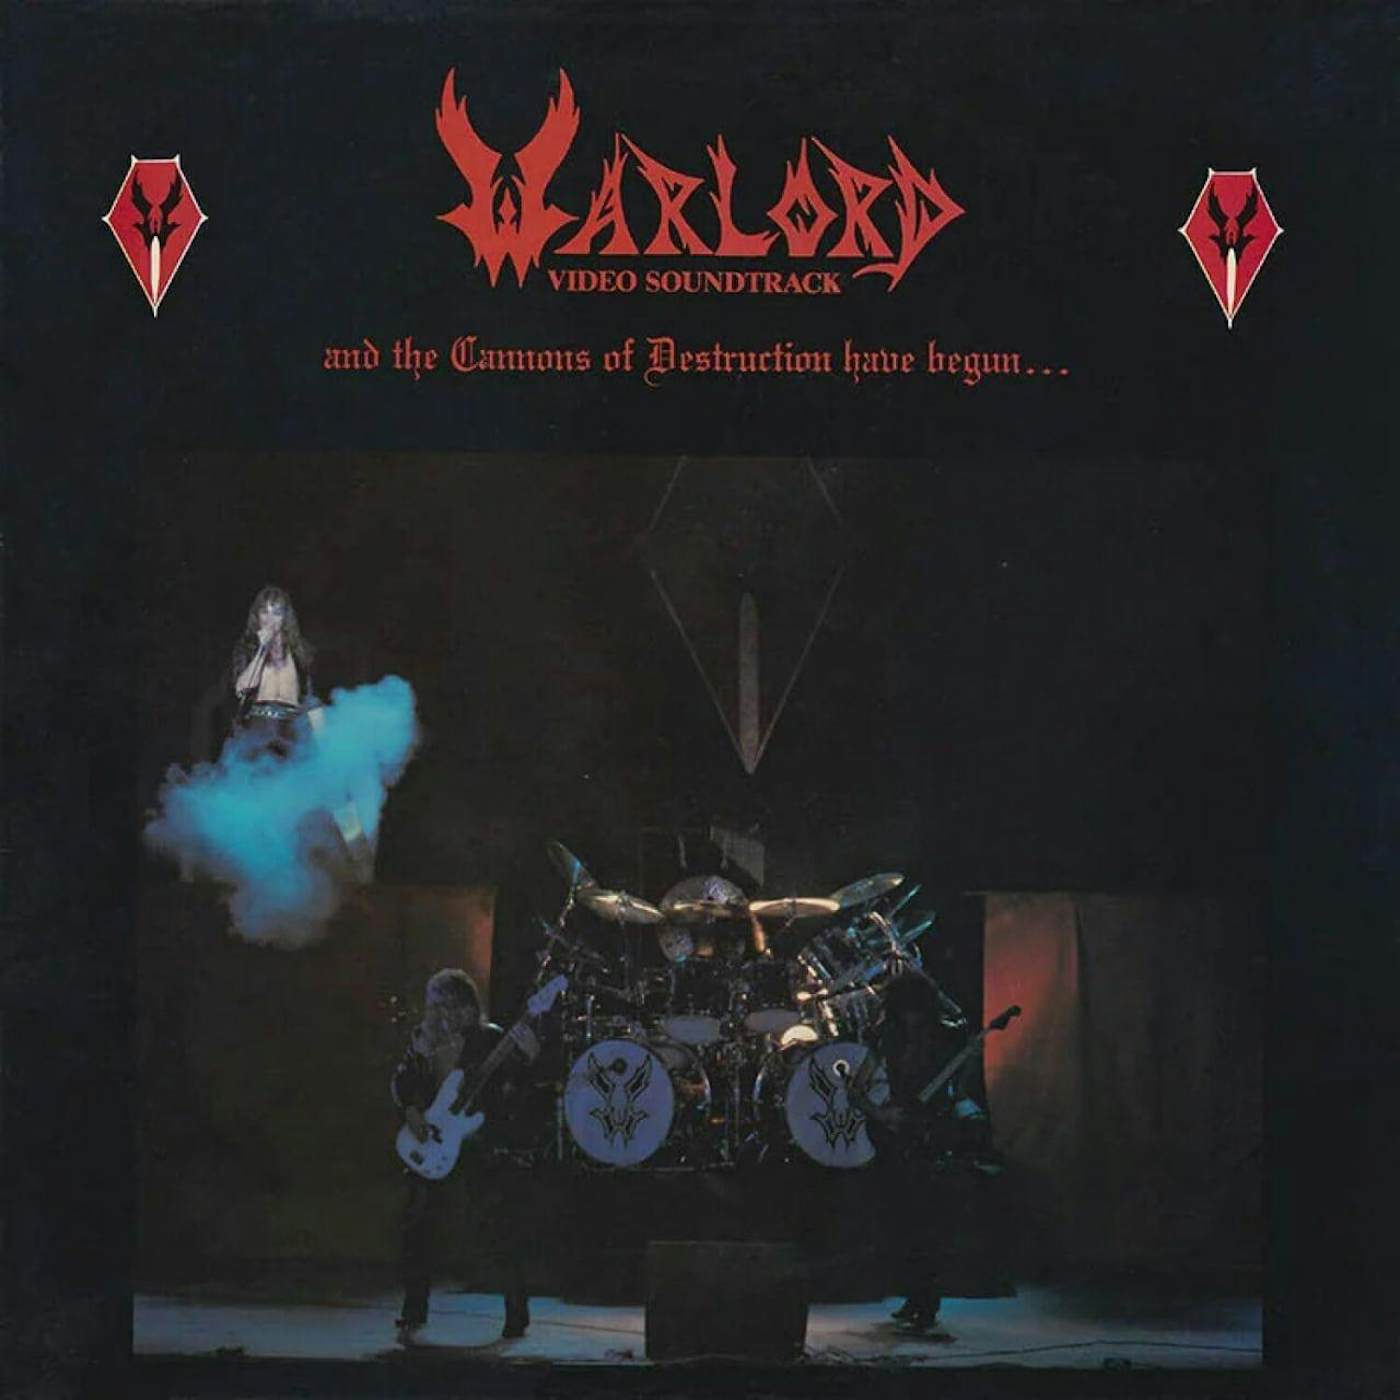 Warlord ... And The Cannons Of Destruction Have Begun (Black) Vinyl Record